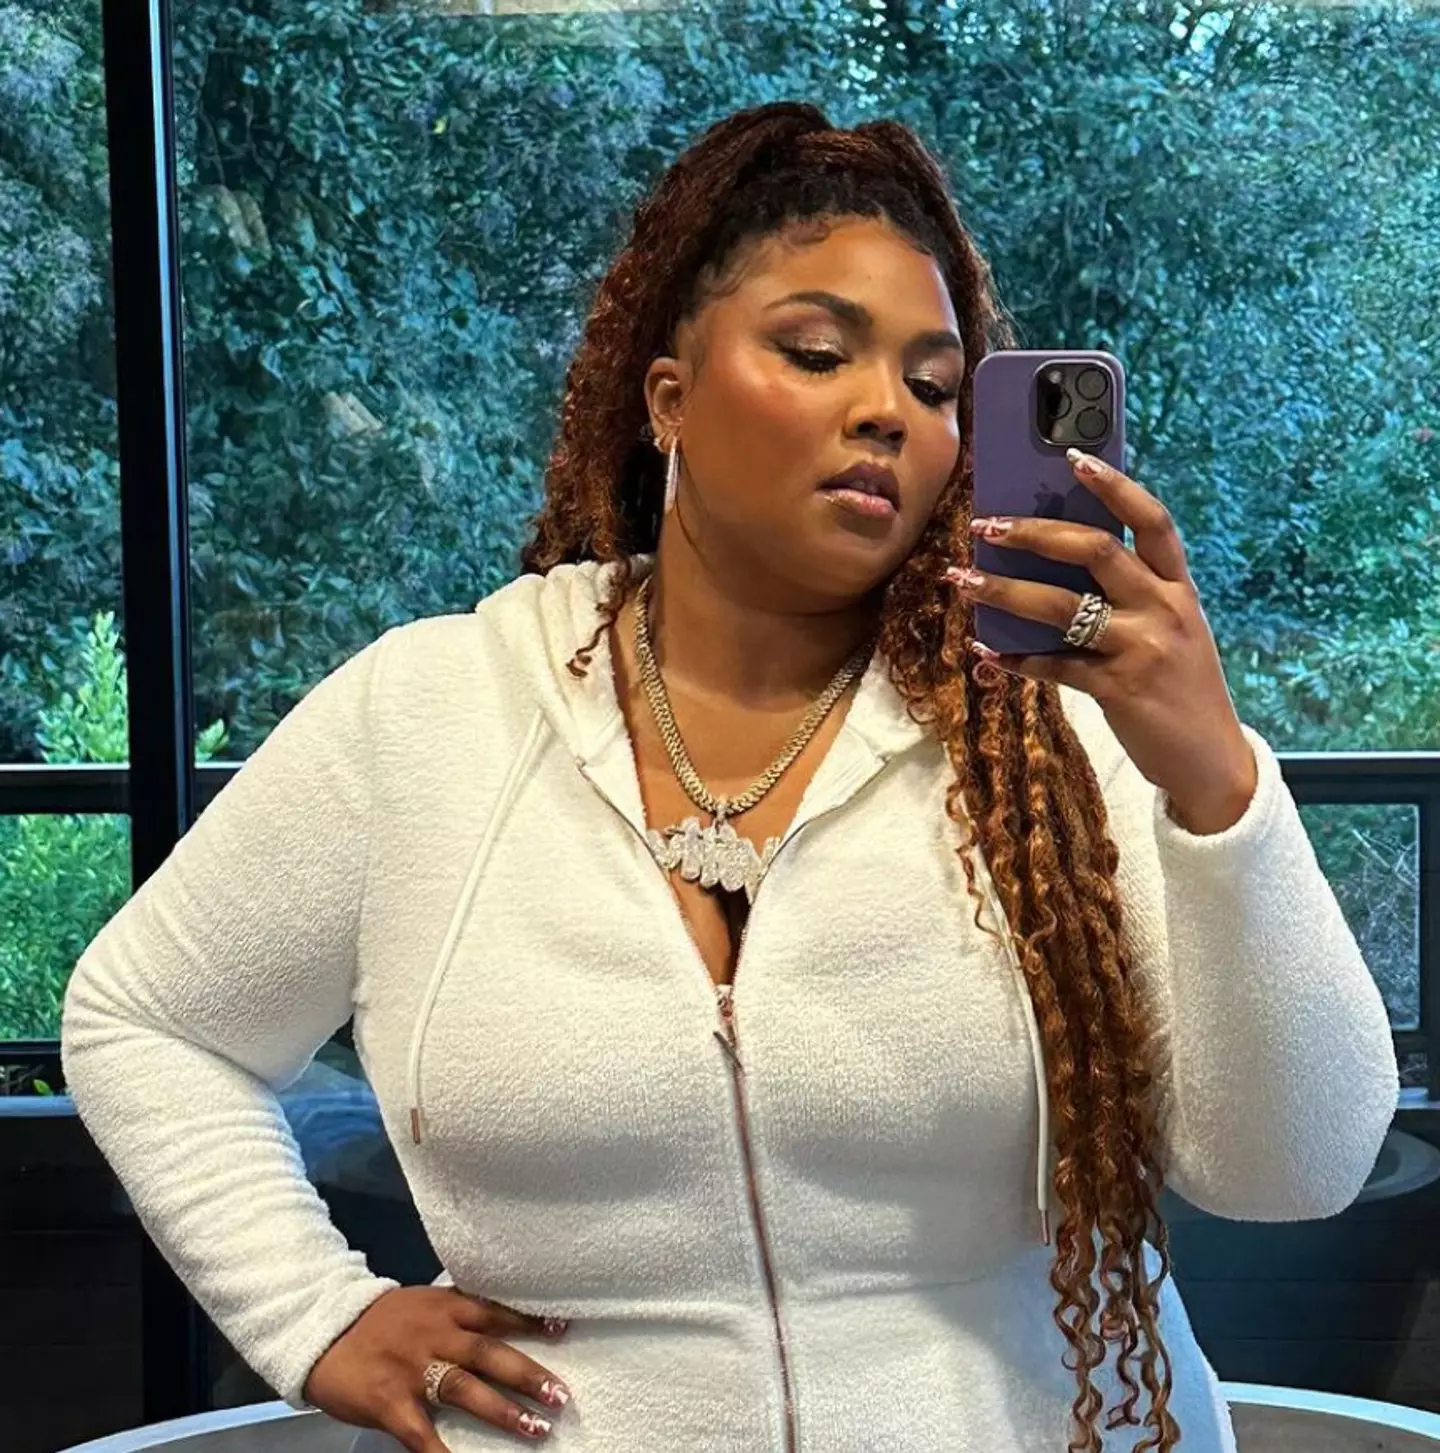 Lizzo is an advocate of body positivity.